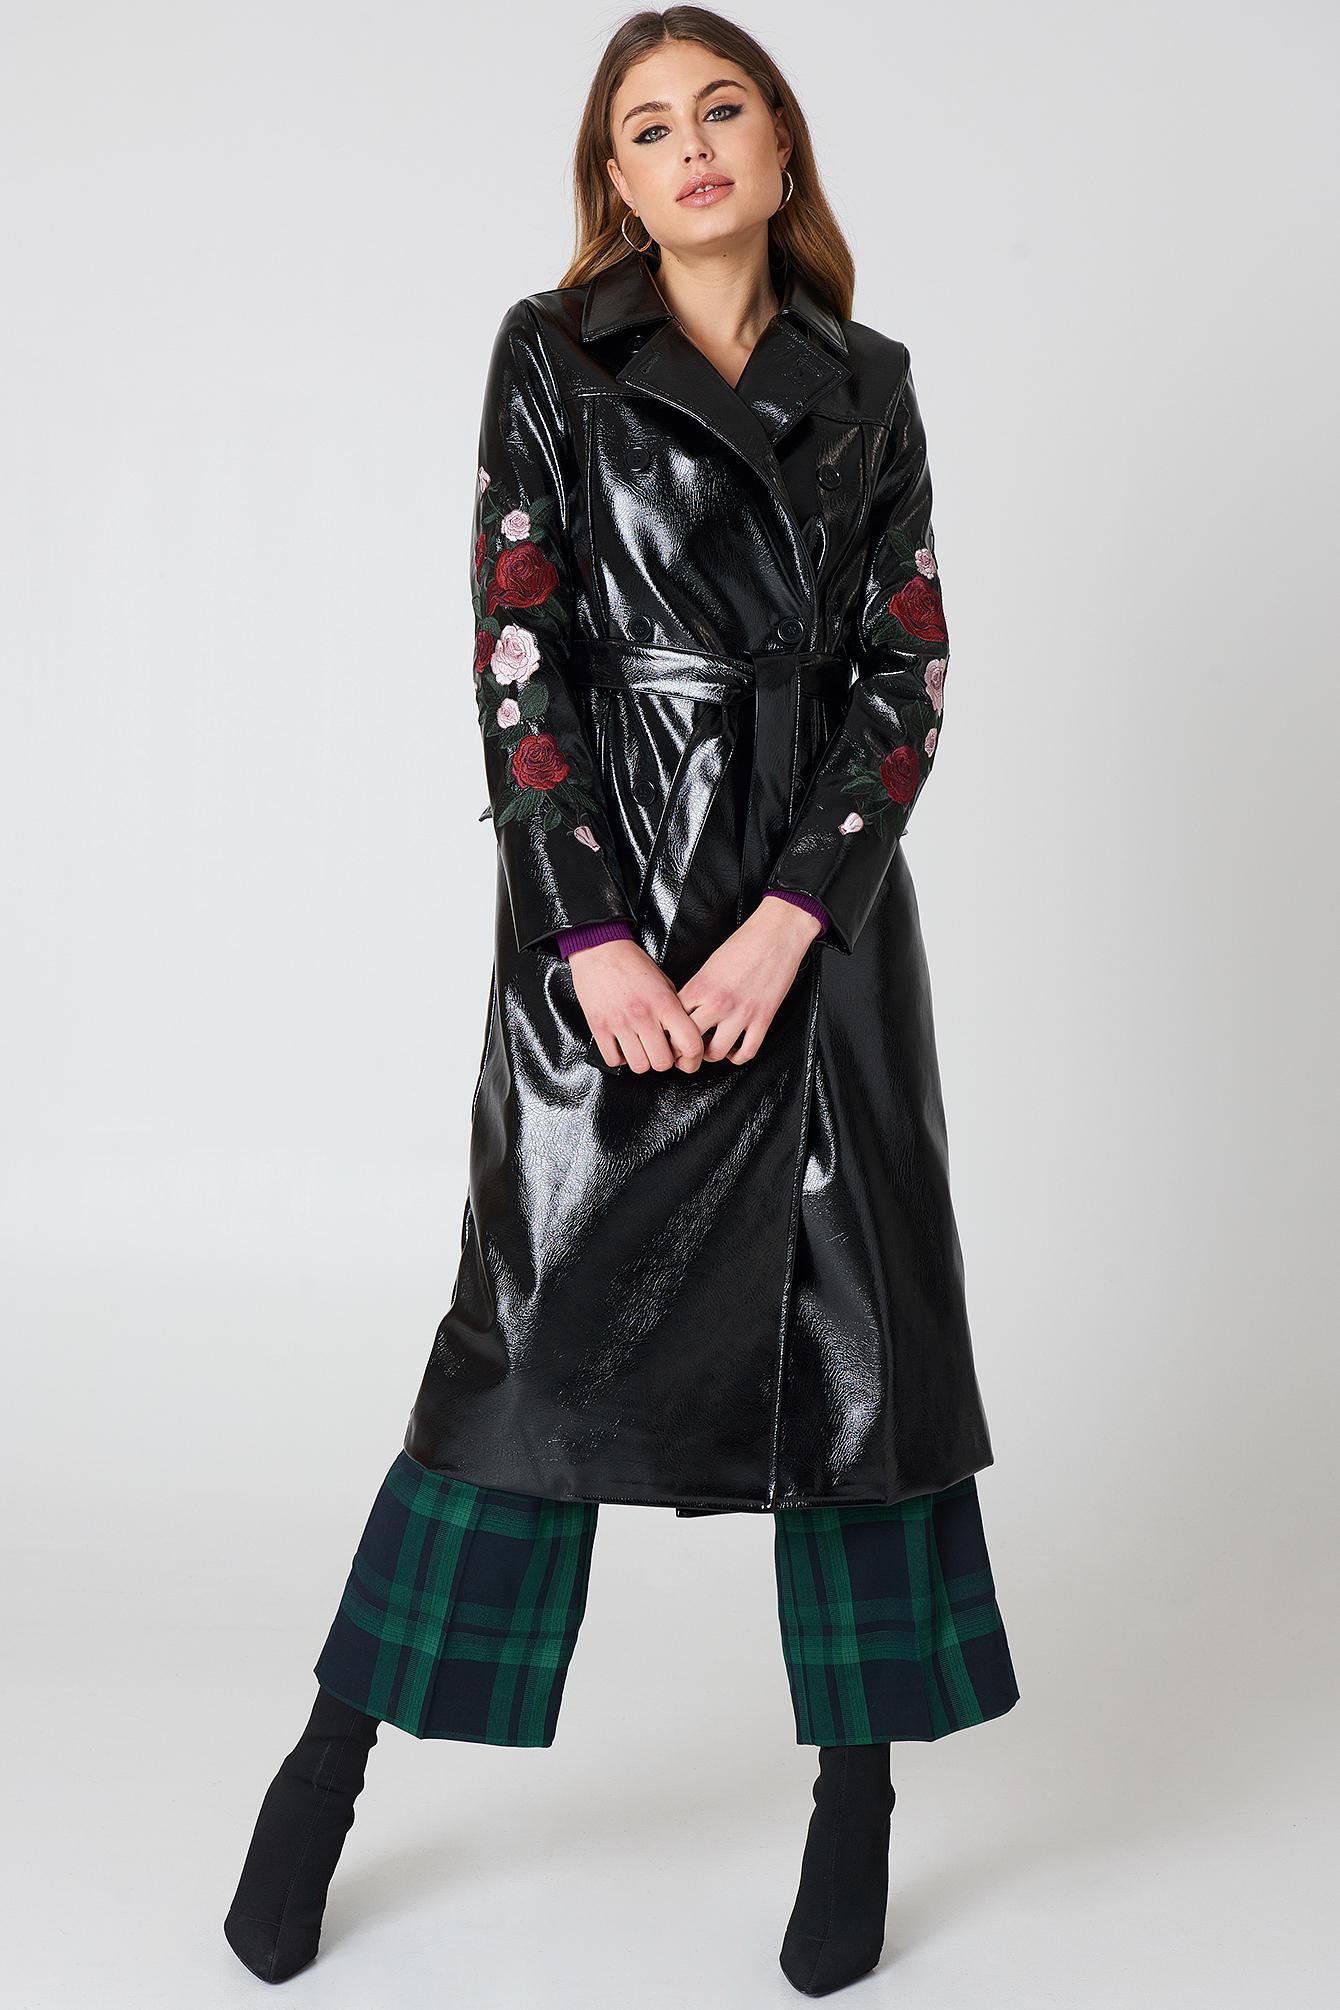 Lyst - Na-Kd Flower Embroidery Patent Coat in Black